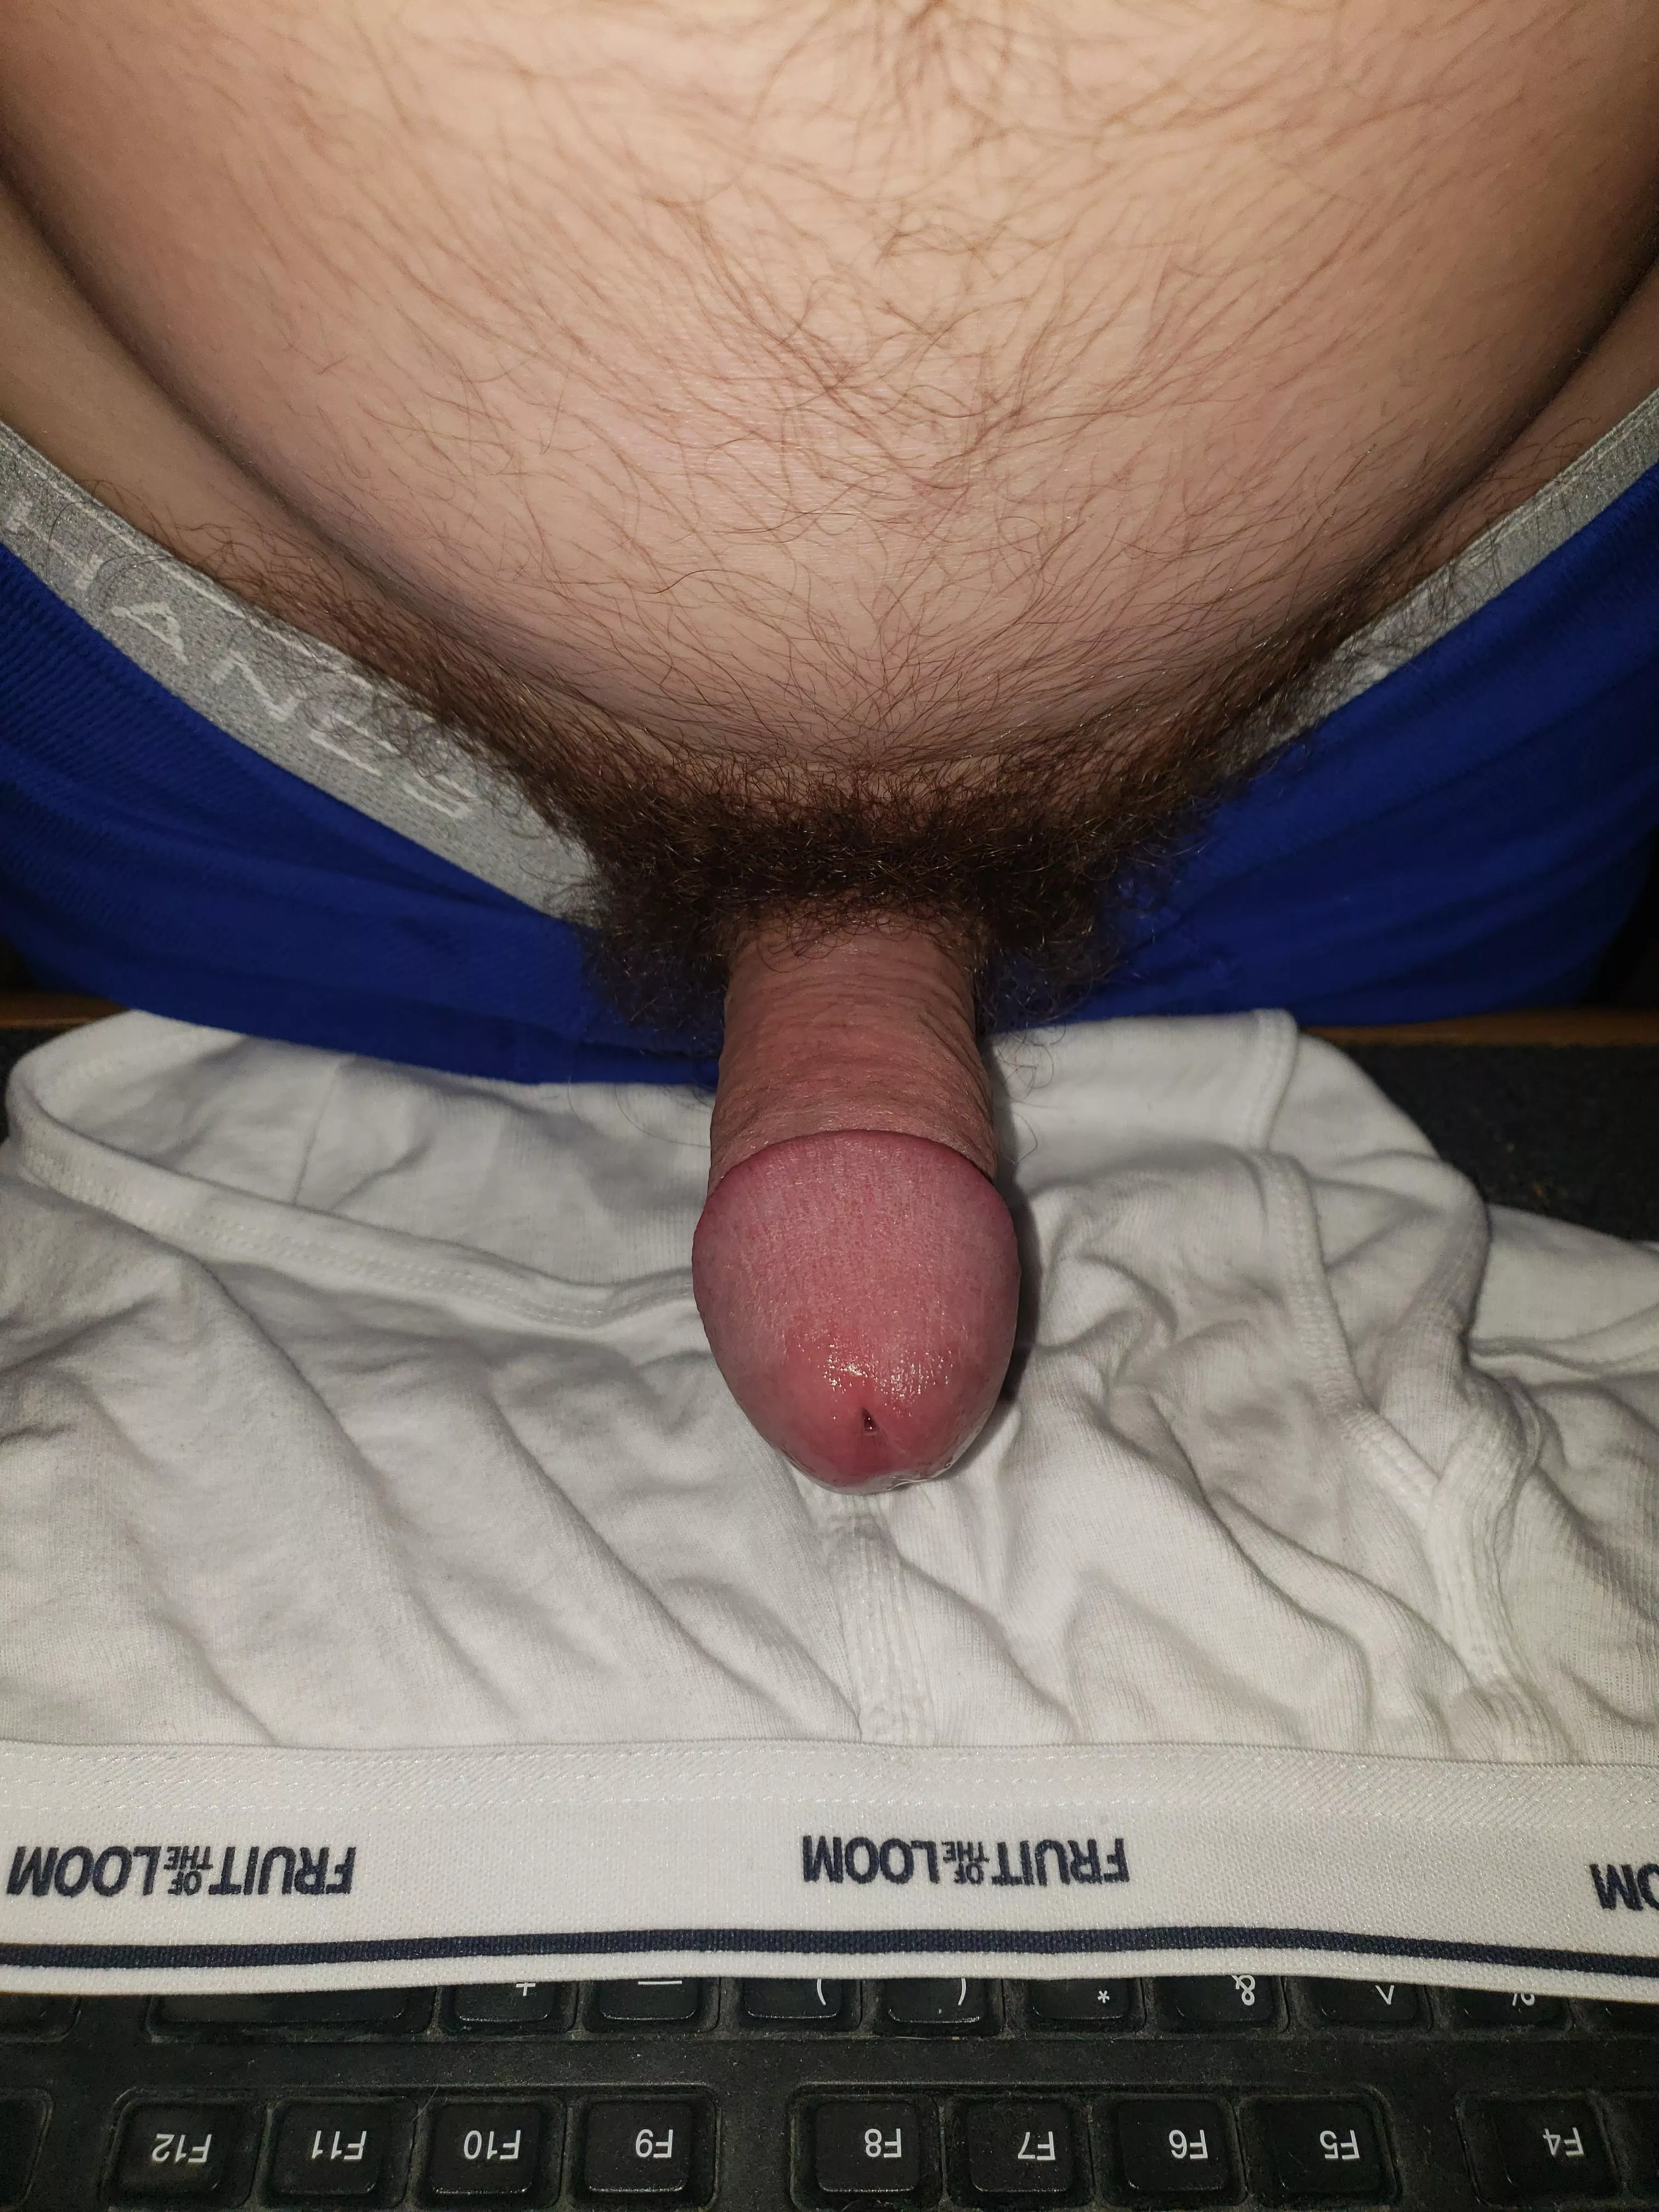 Shooting A Load Into Tighty Whities Nudes By Marlbororedguy